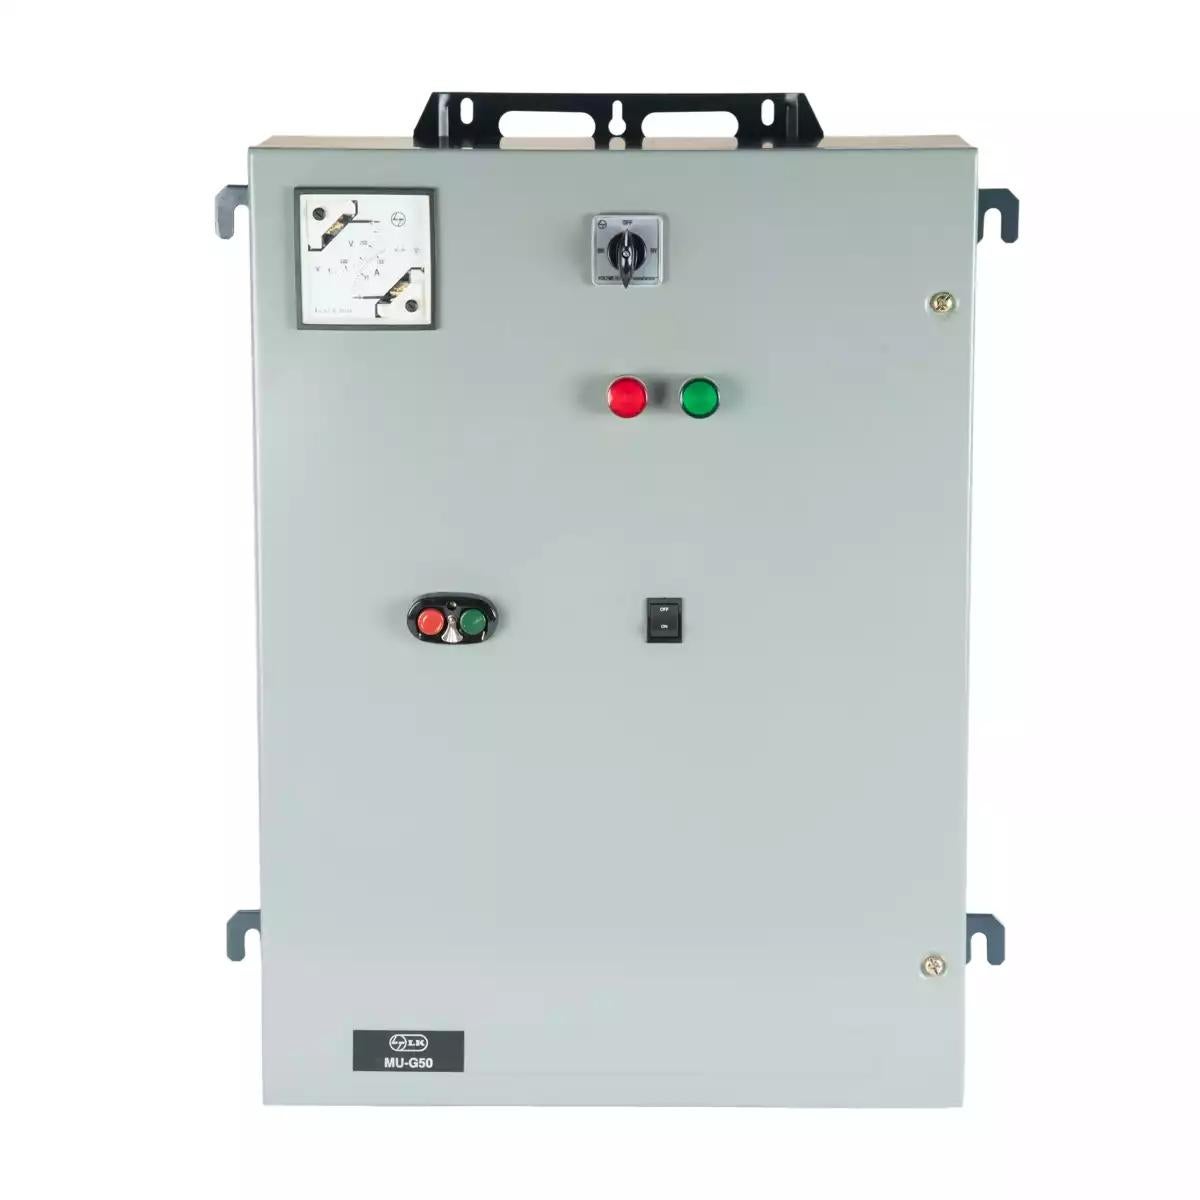 Three Phase Fully Automatic Star Delta Controller for Submersible Pump Application,MU-G50,30HP,FASD